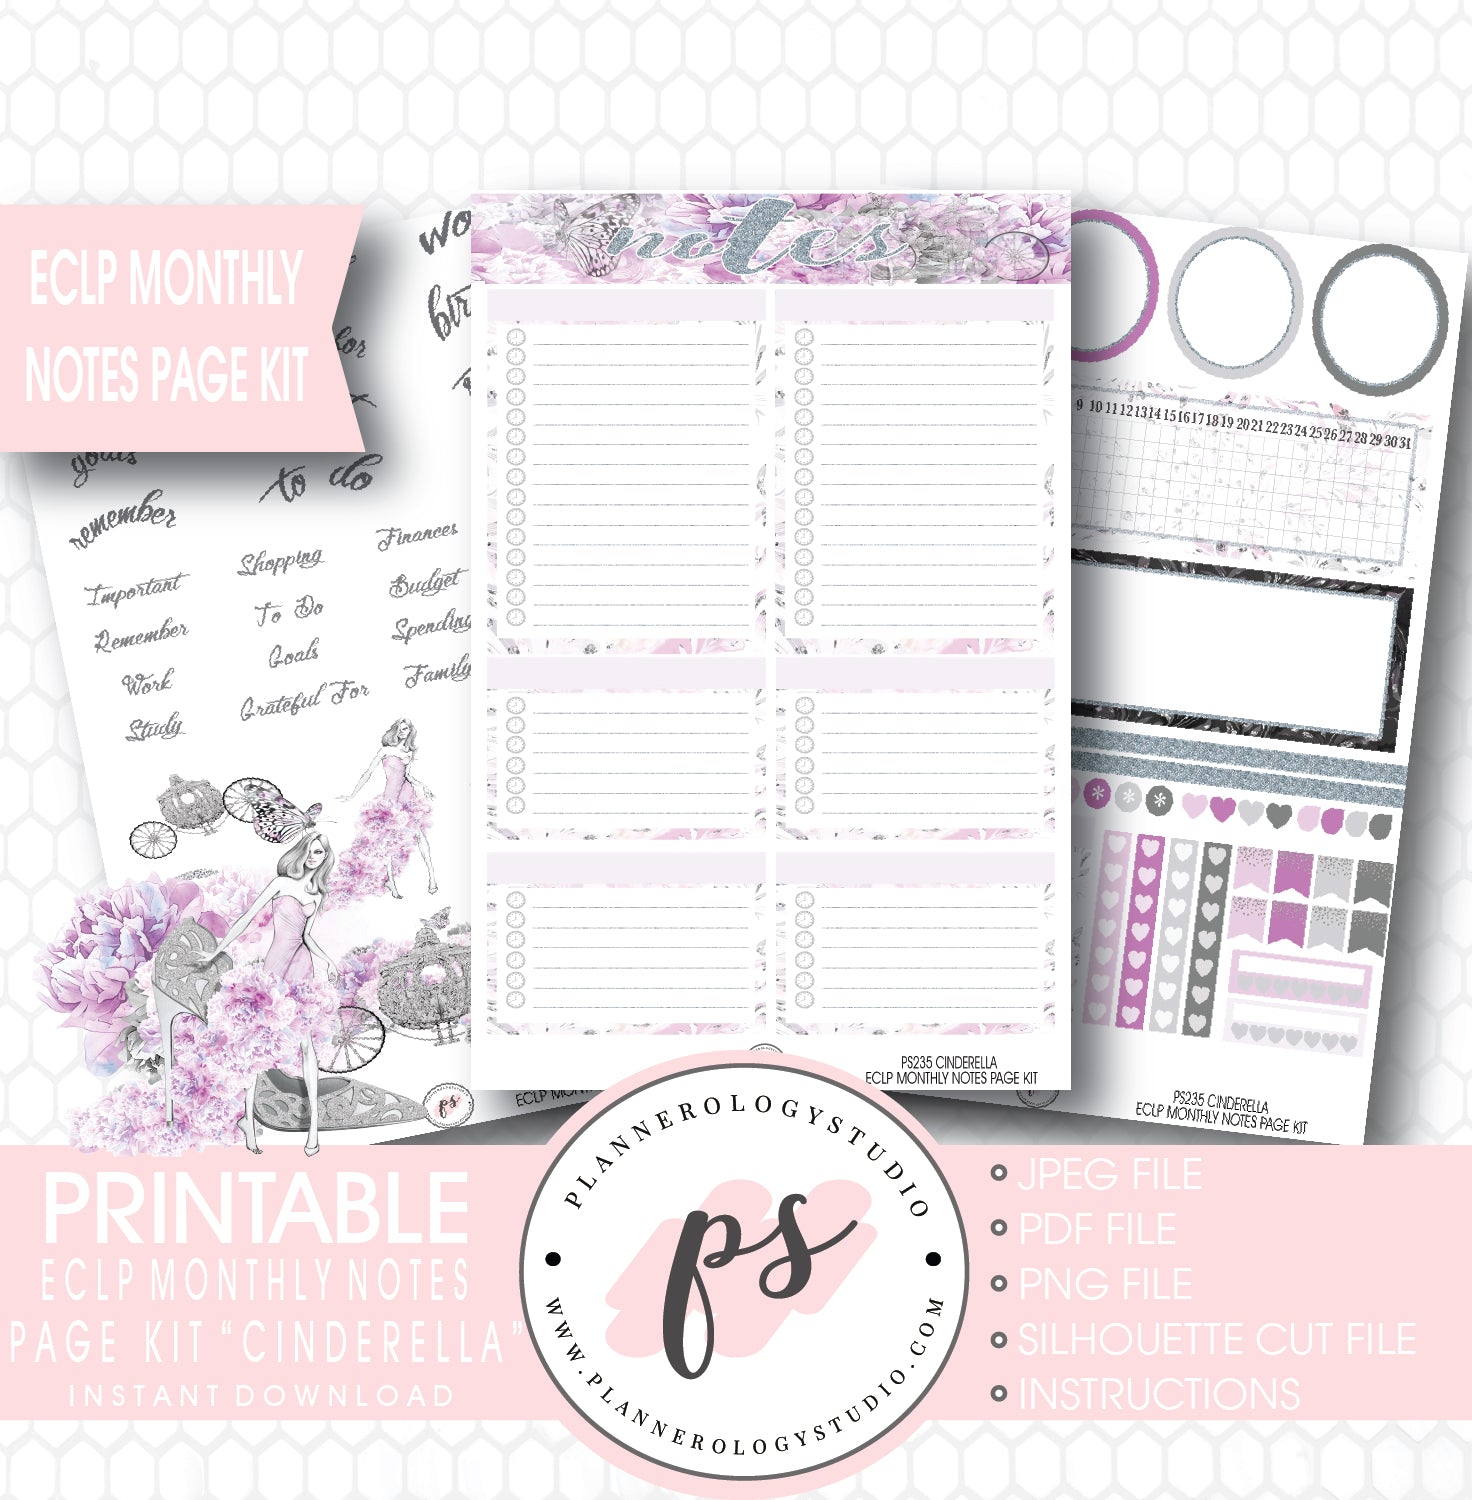 Cinderella Monthly Notes Page Kit Printable Planner Stickers (for use with ECLP) - Plannerologystudio